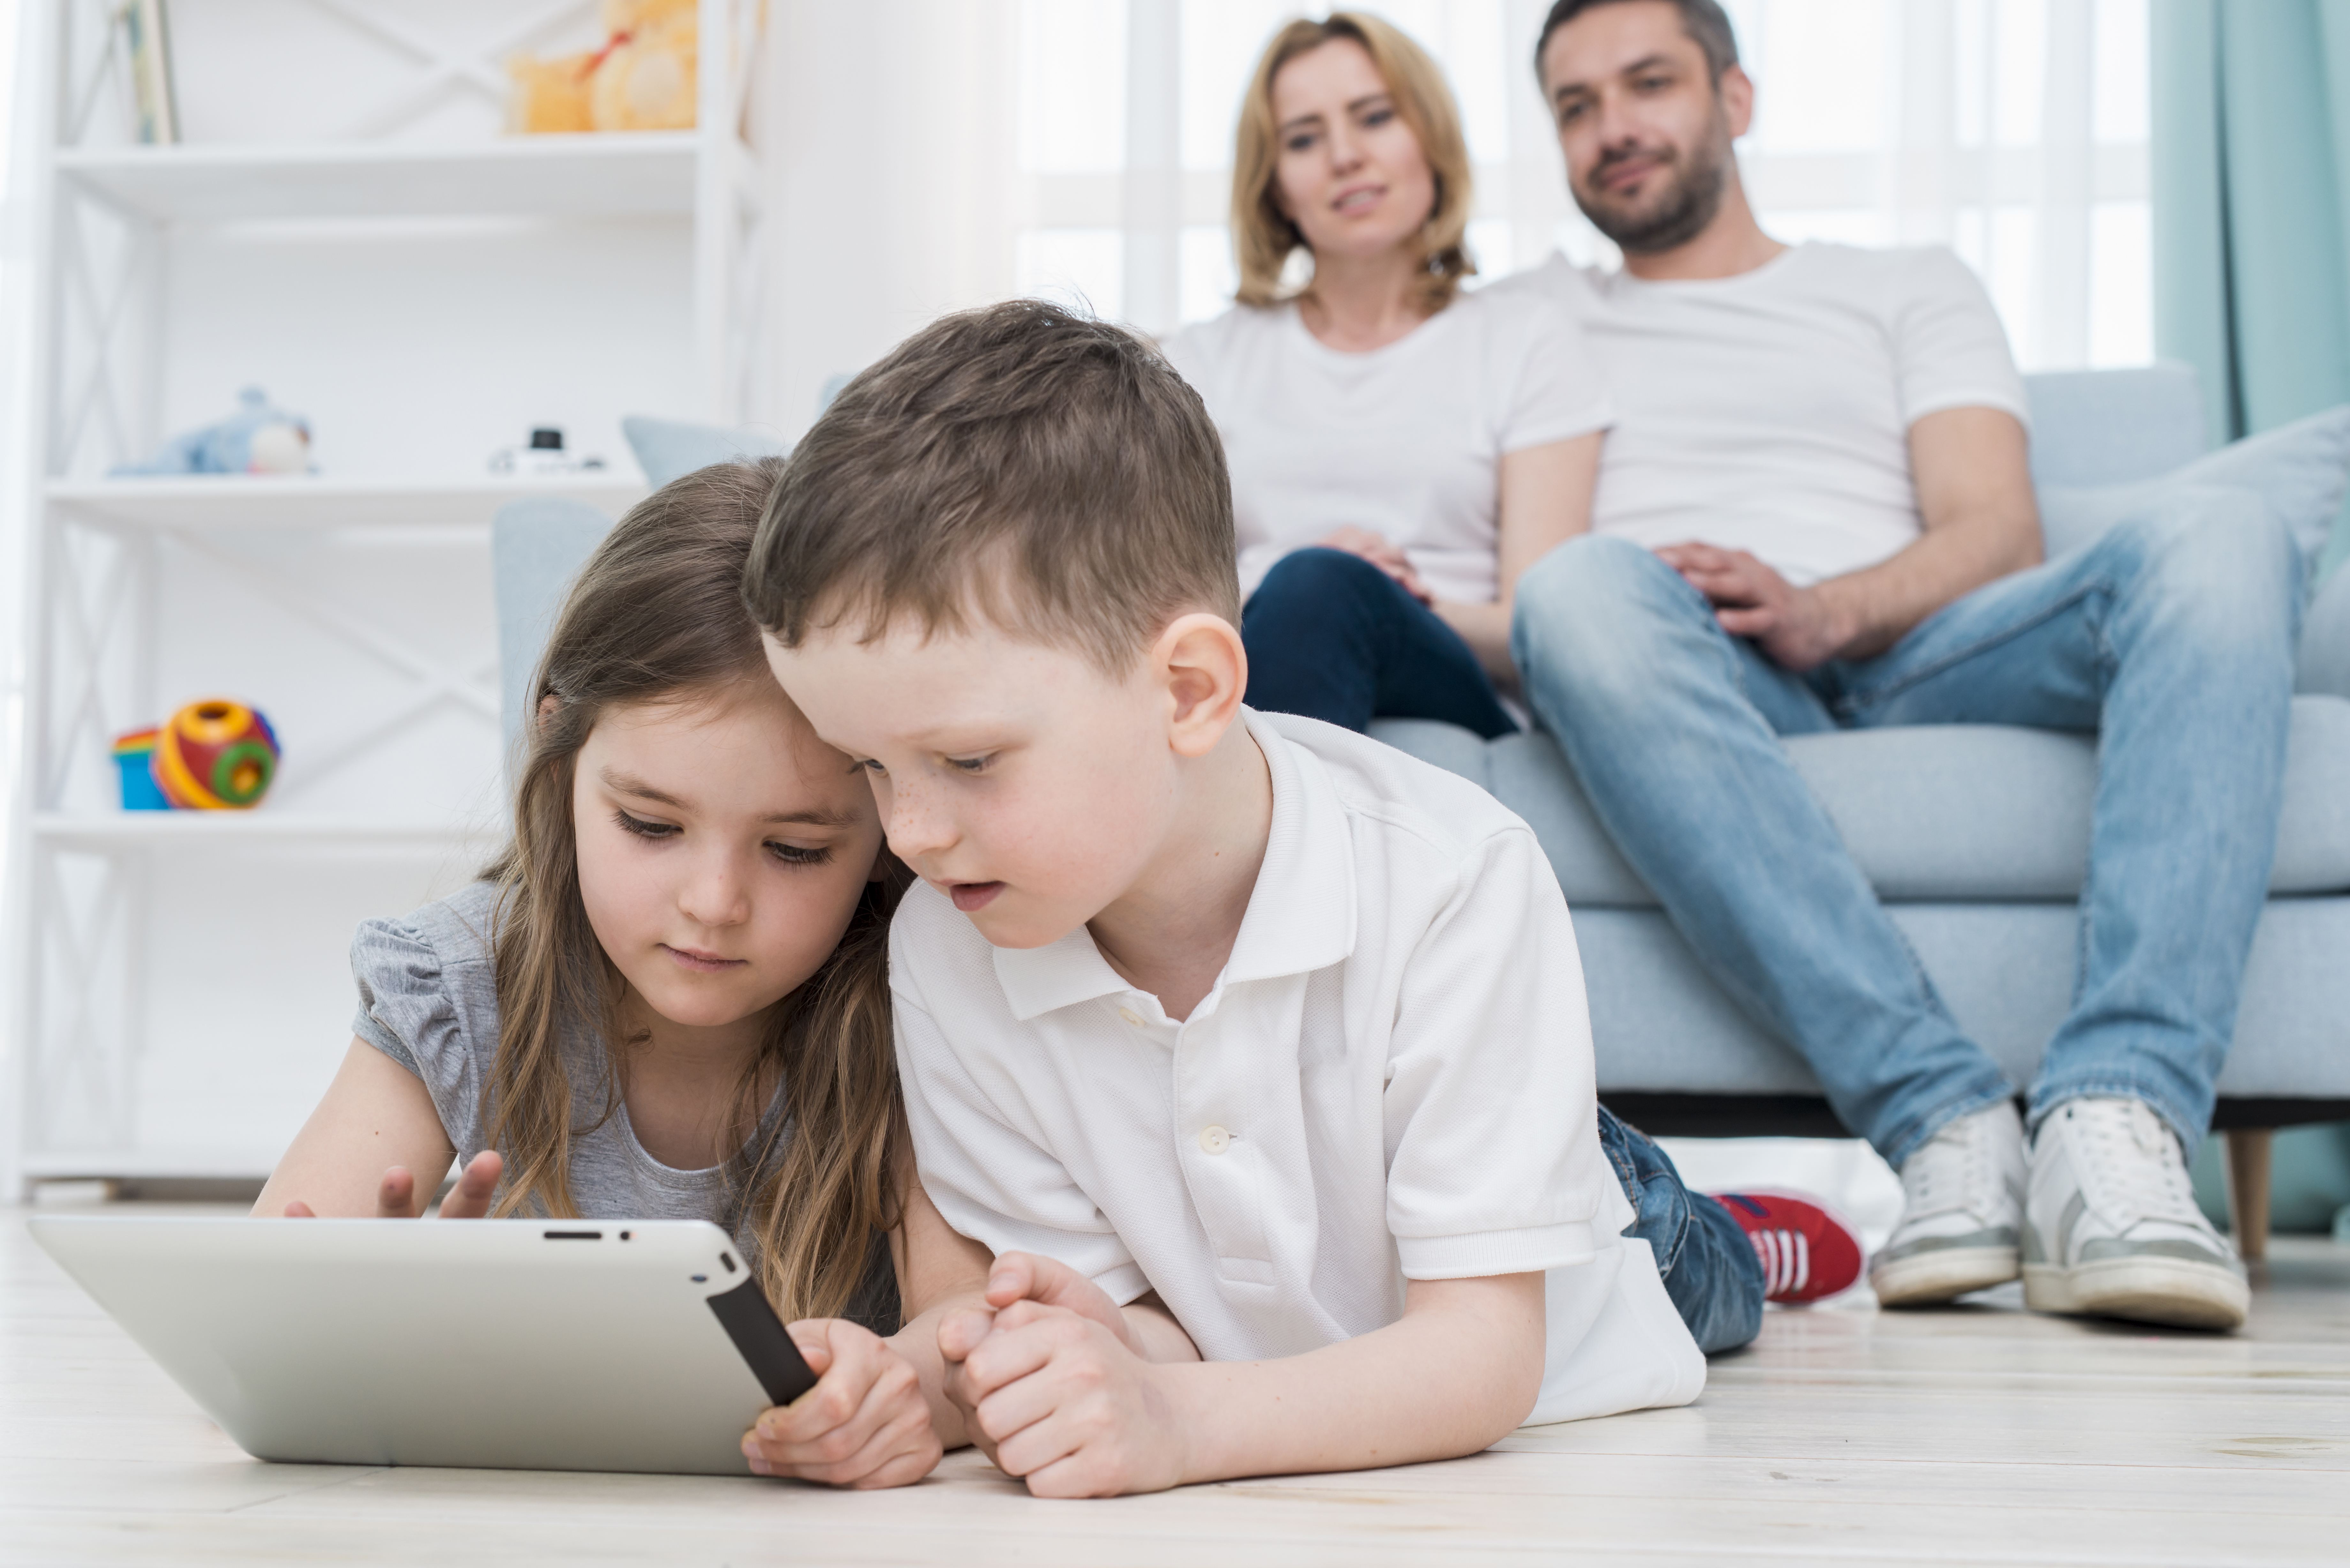 A parent’s guide to cyber security